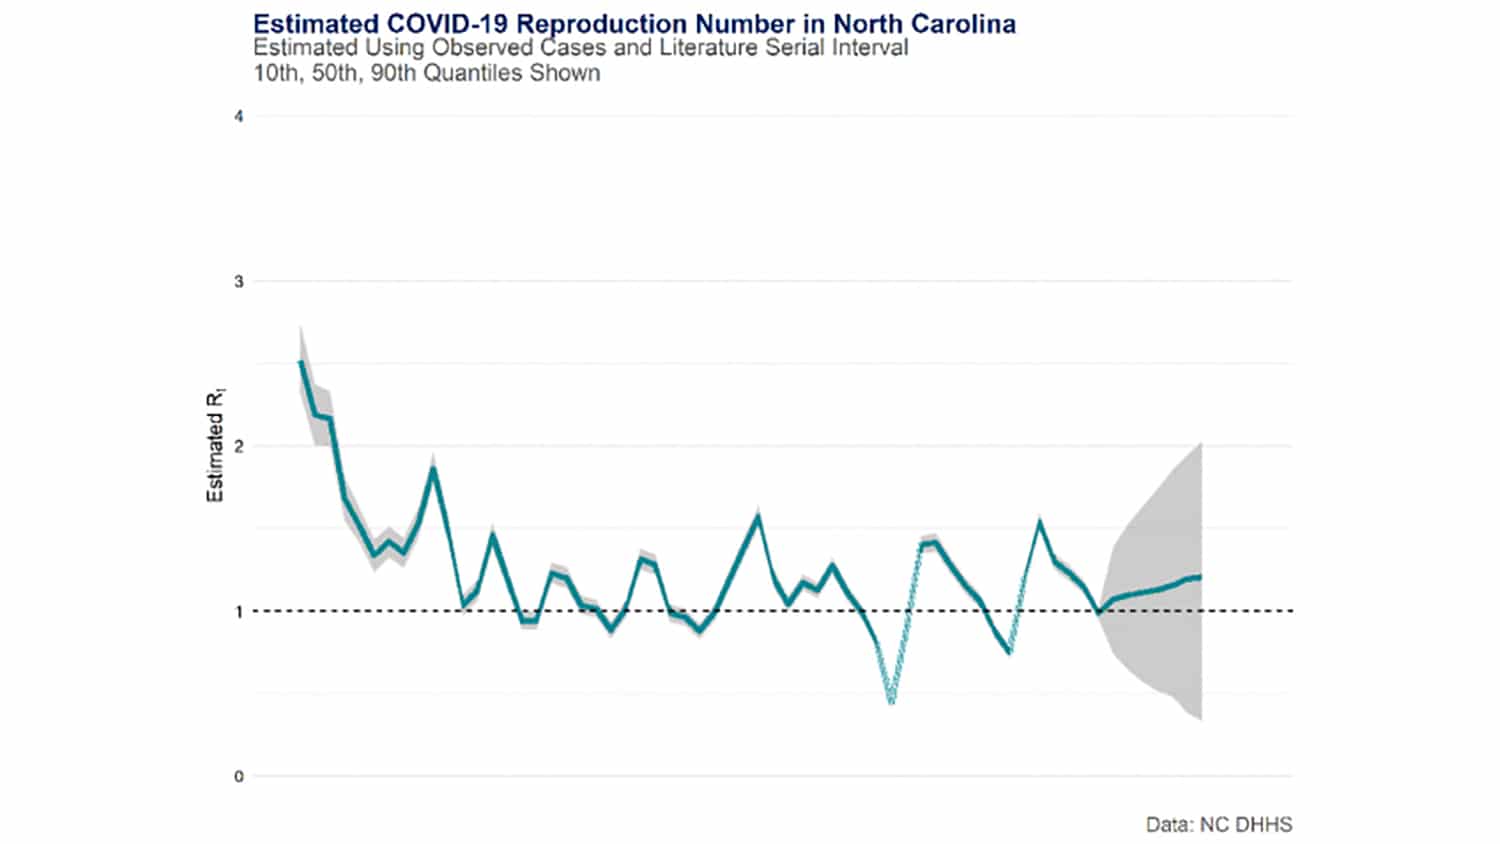 A line graph showing predictions for the estimated COVID-19 reproduction number in North Carolina